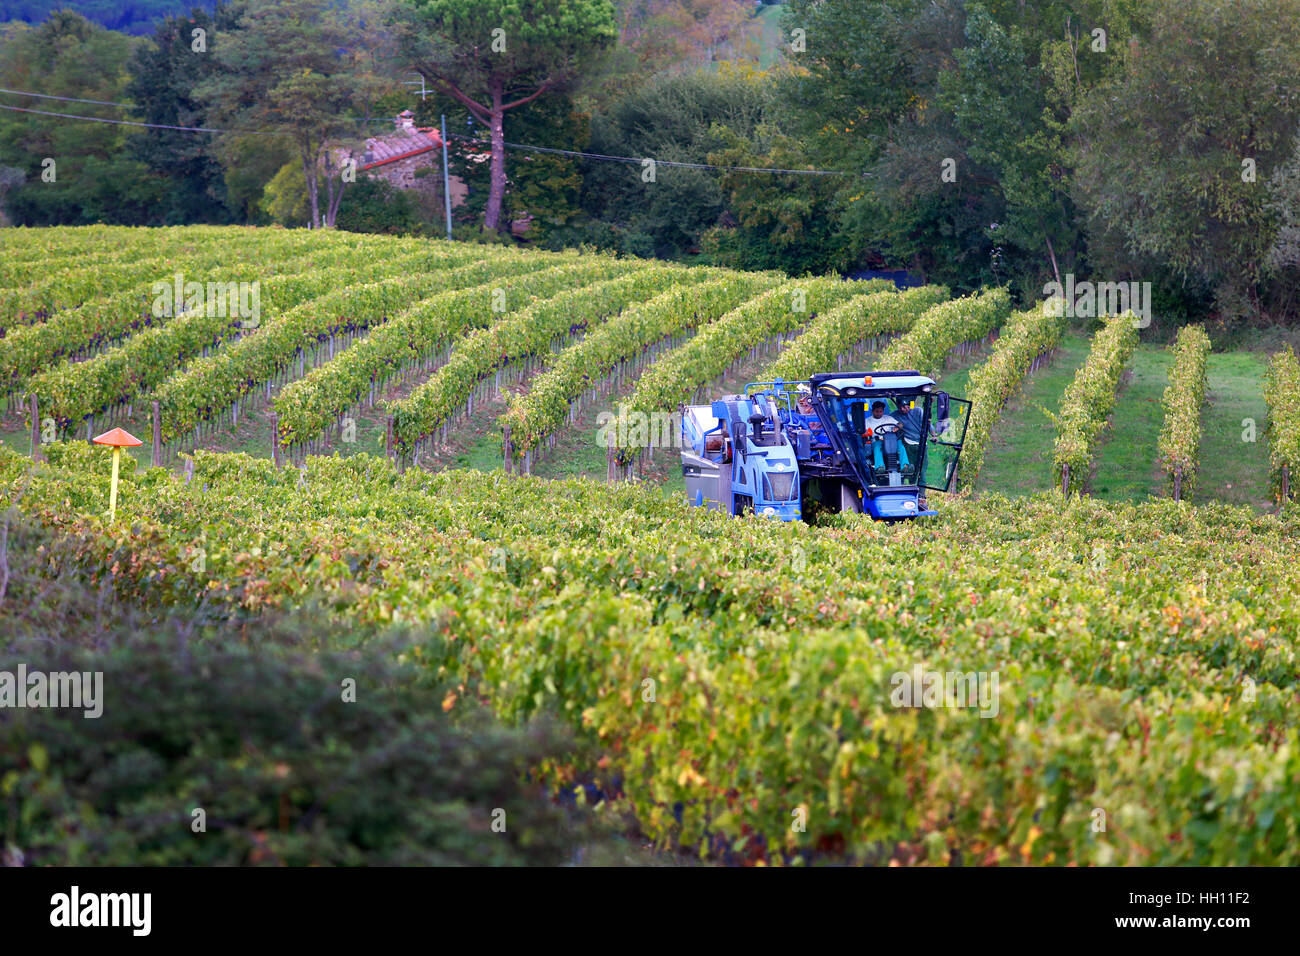 A New Holland Grape Harvester at work in the vineyards around San Casciano in Val di Pesa in Tuscany, Italy. Stock Photo